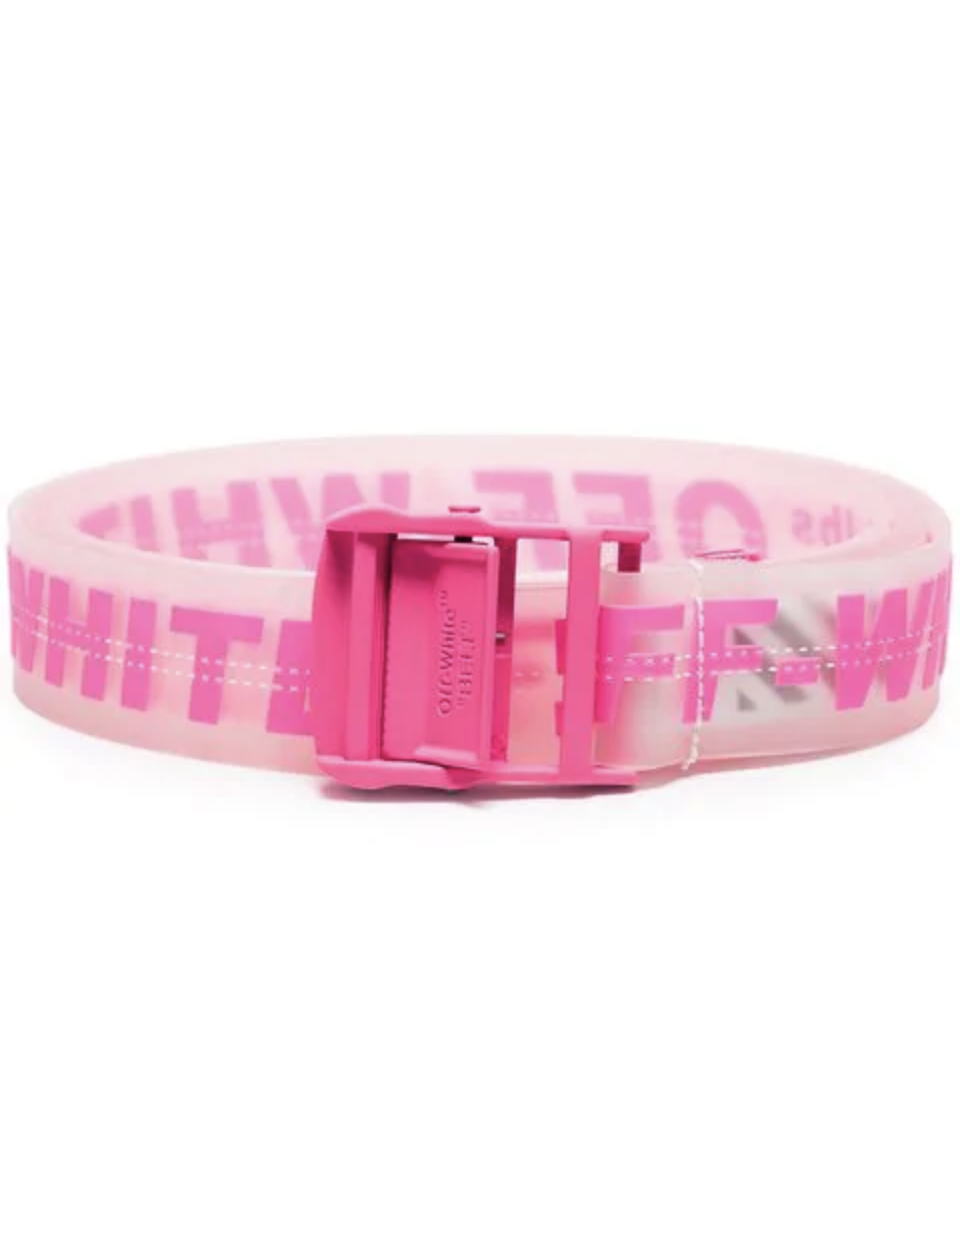 Off-White Rubber Industrial Belt - Pink